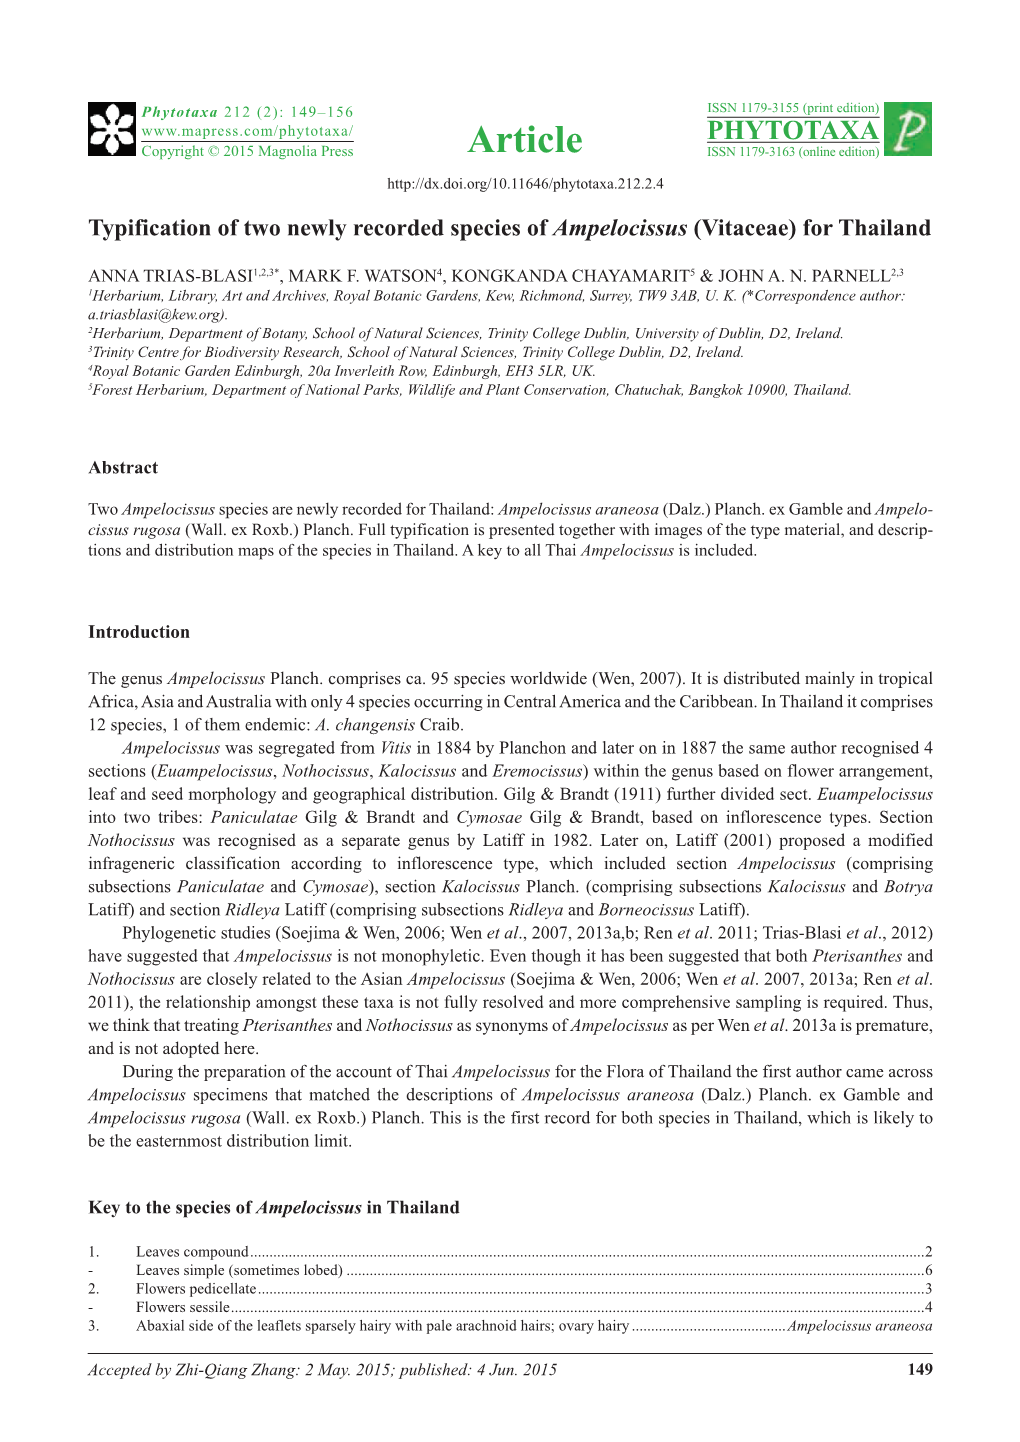 Typification of Two Newly Recorded Species of Ampelocissus (Vitaceae) for Thailand